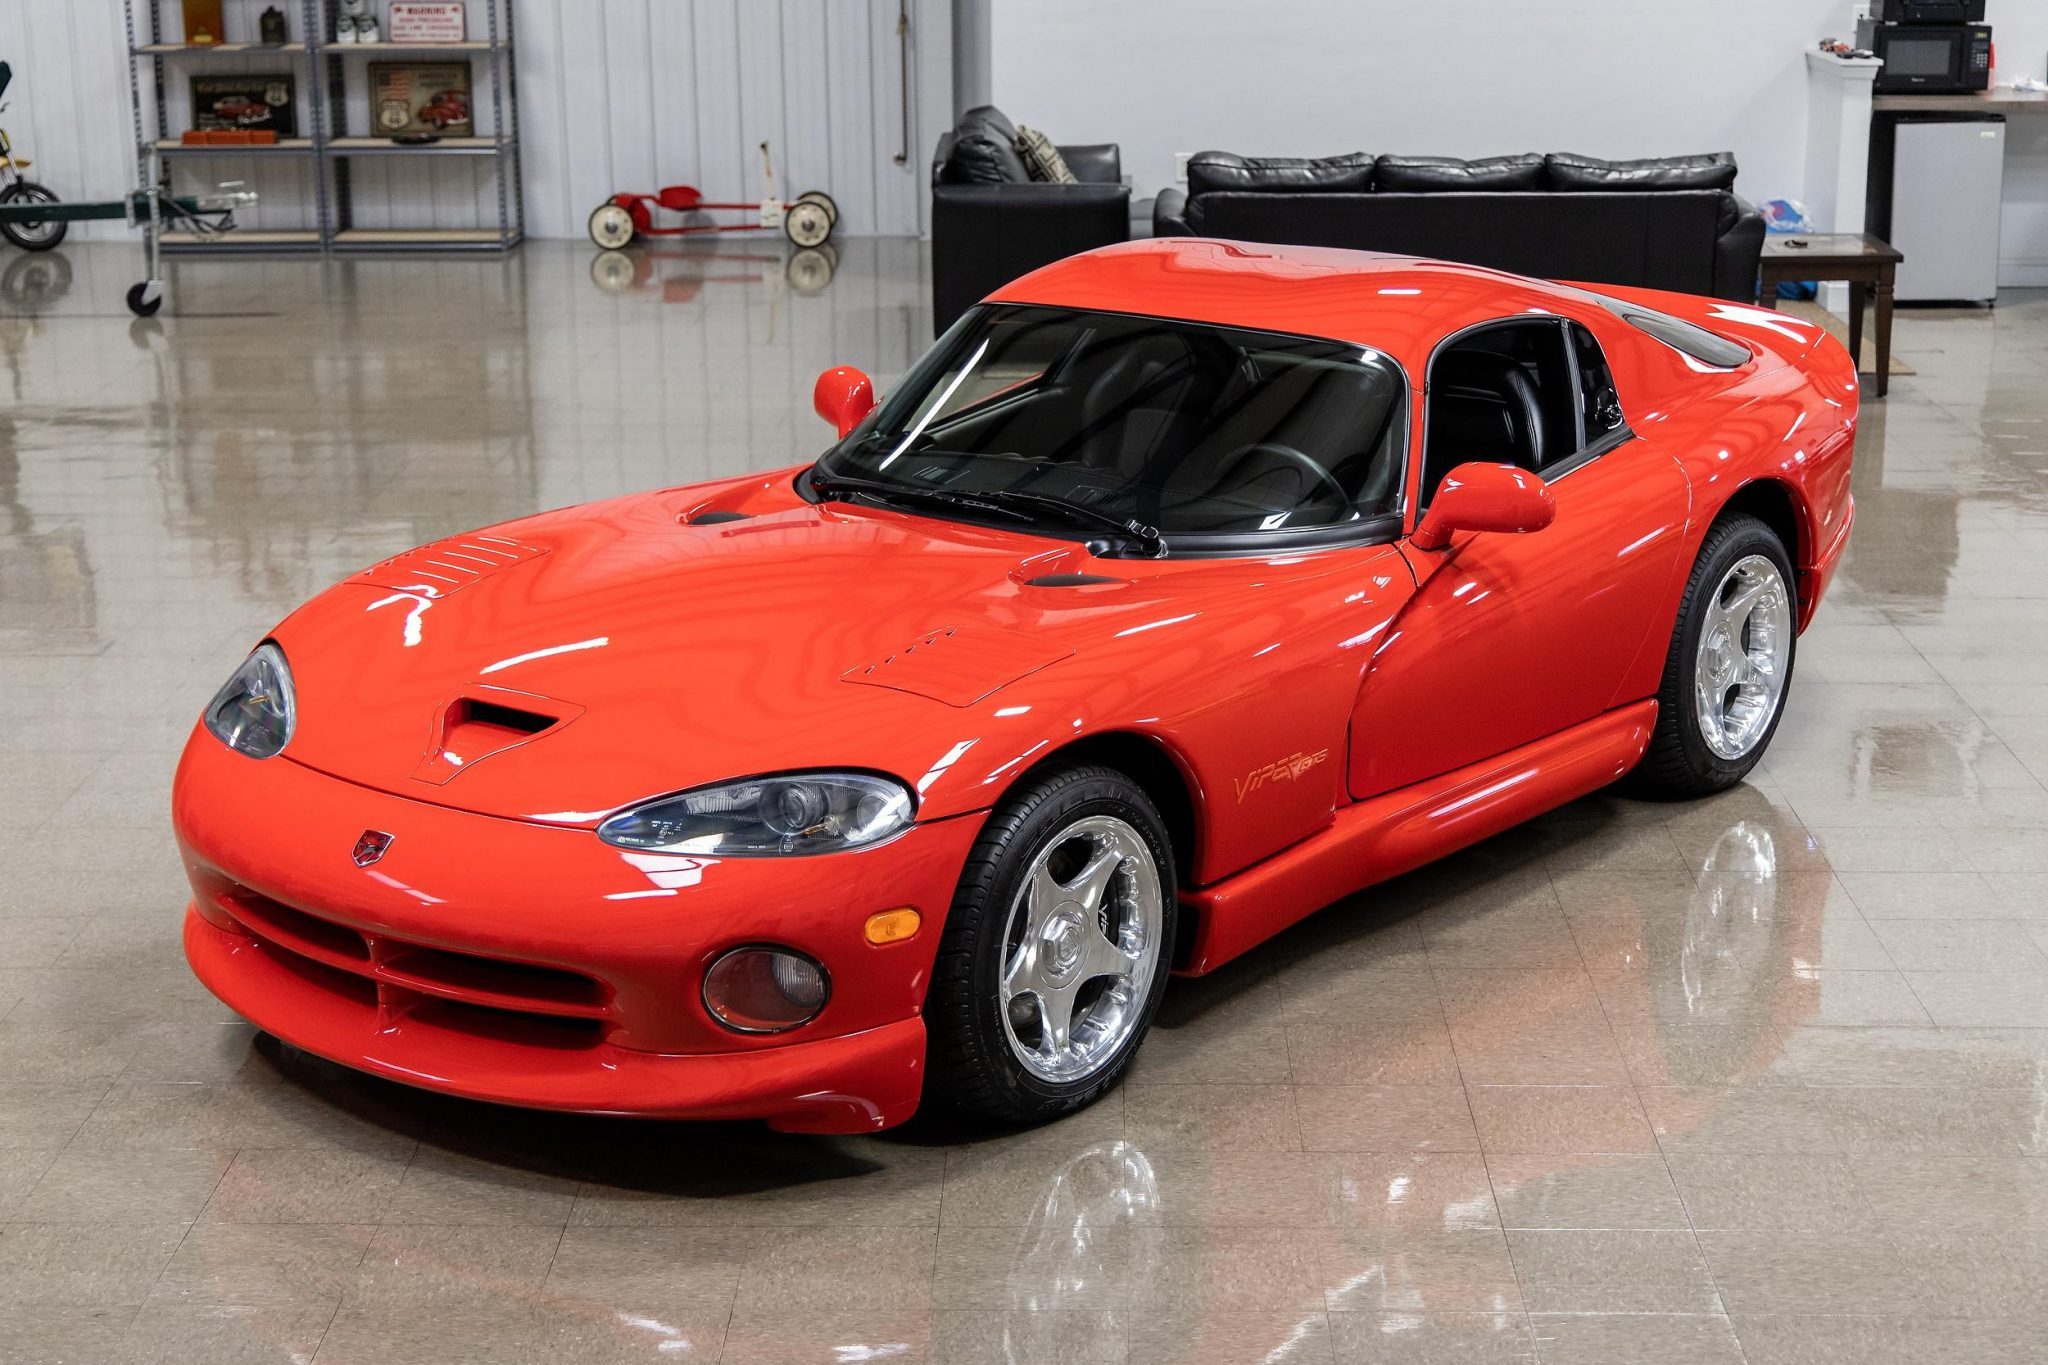 1997 Dodge Viper GTS With Just 17 Miles on the Clock Is Instant Time Travel  - autoevolution